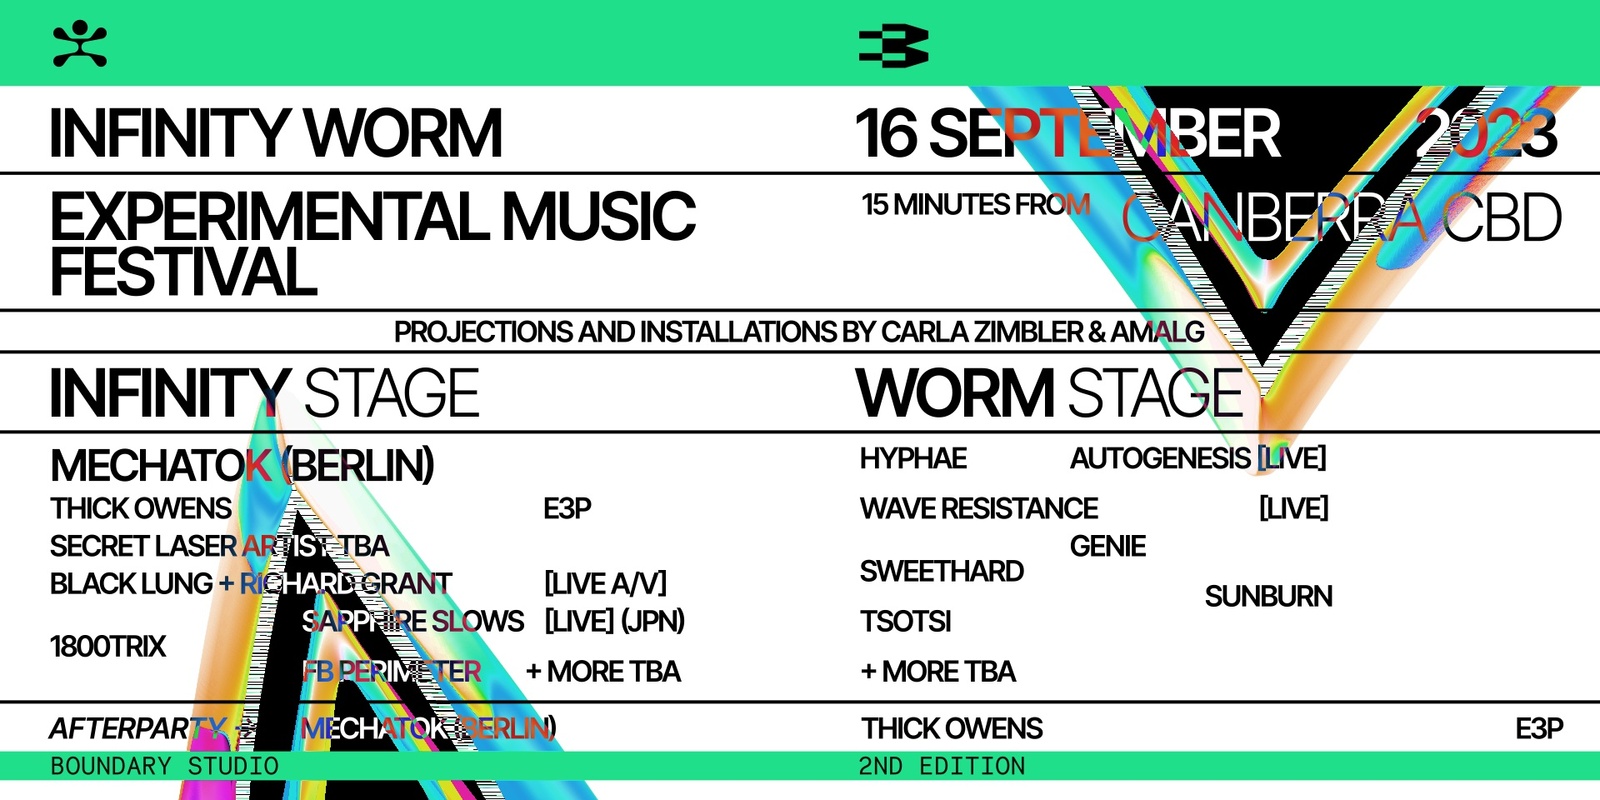 Banner image for Infinity Worm II: Canberra Electronic Music Festival w/ Mechatok (Berlin)